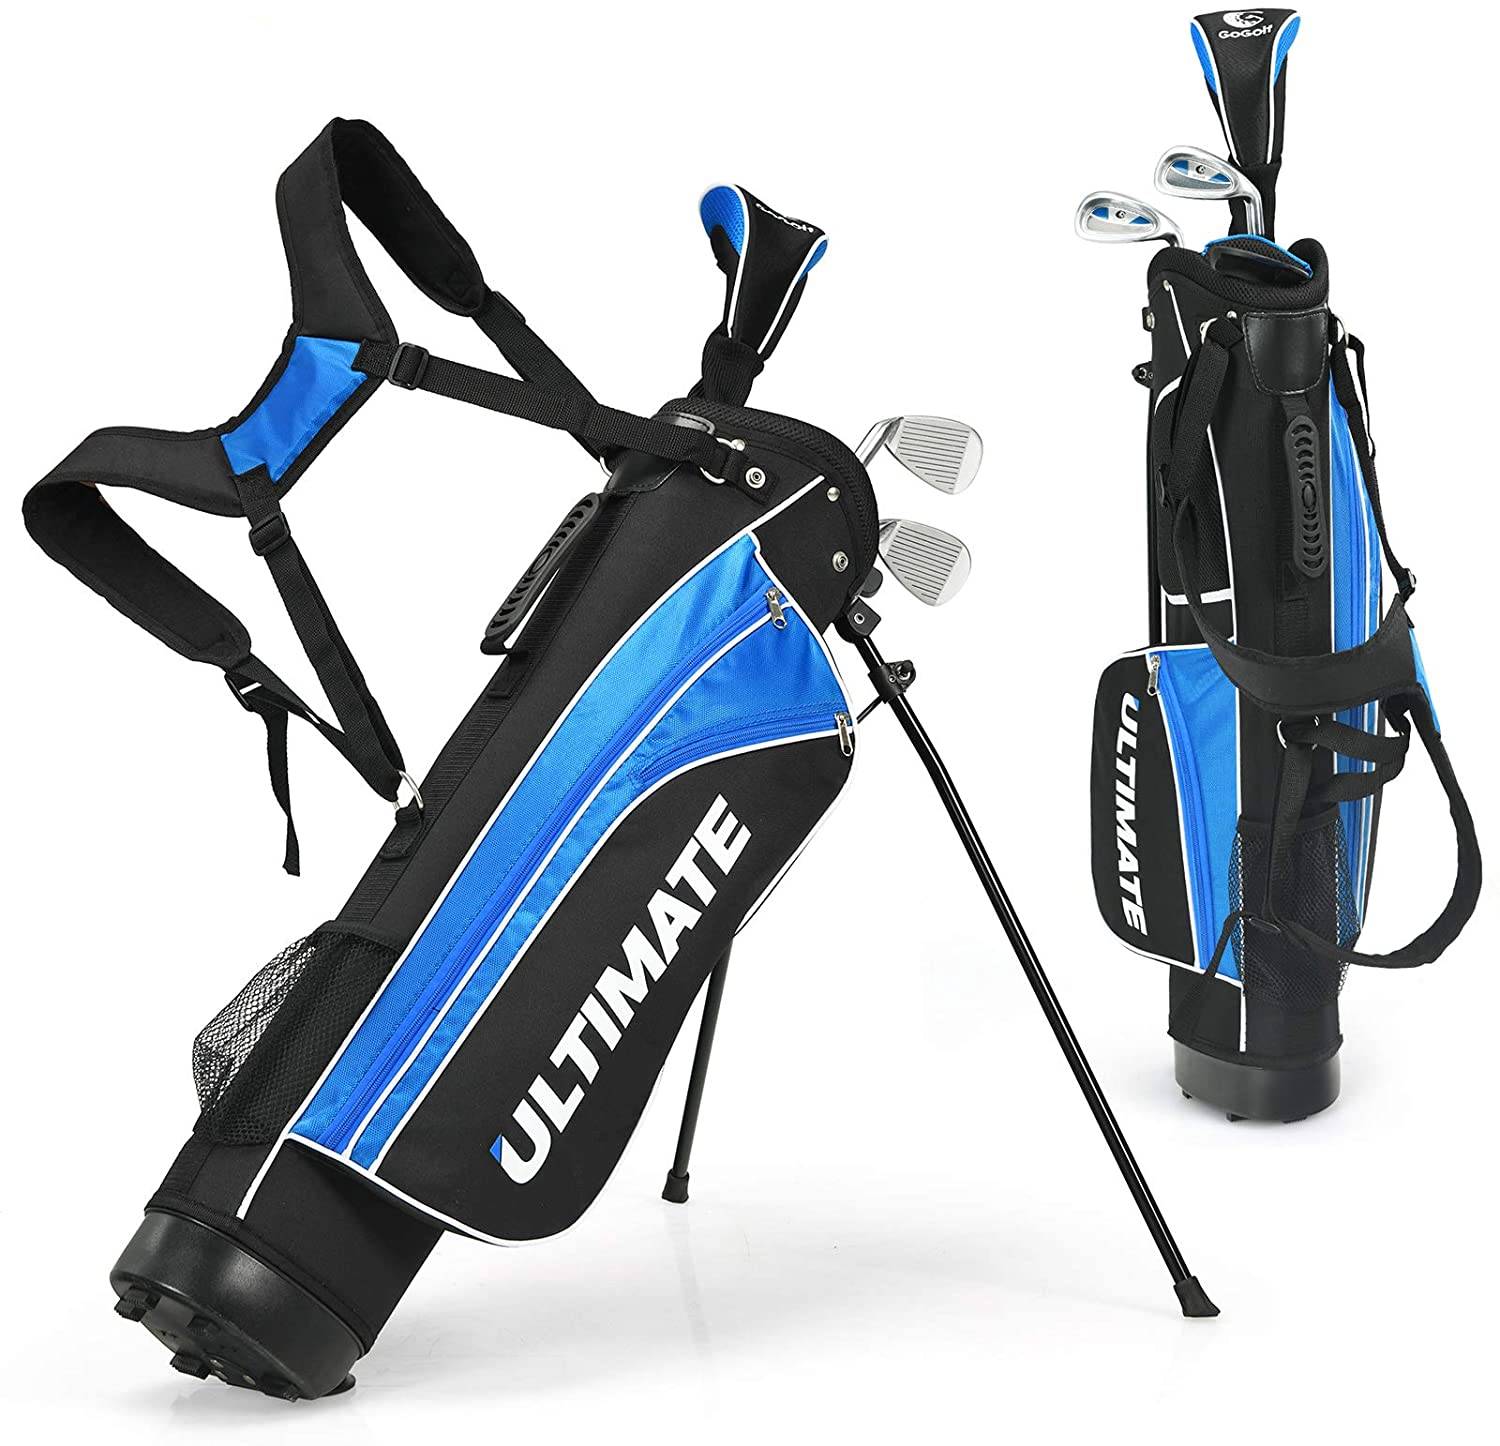  Forgan of St Andrews F100 Iron Set with Hybrid, Mens Right  Hand, Steel Shafts : Sports & Outdoors